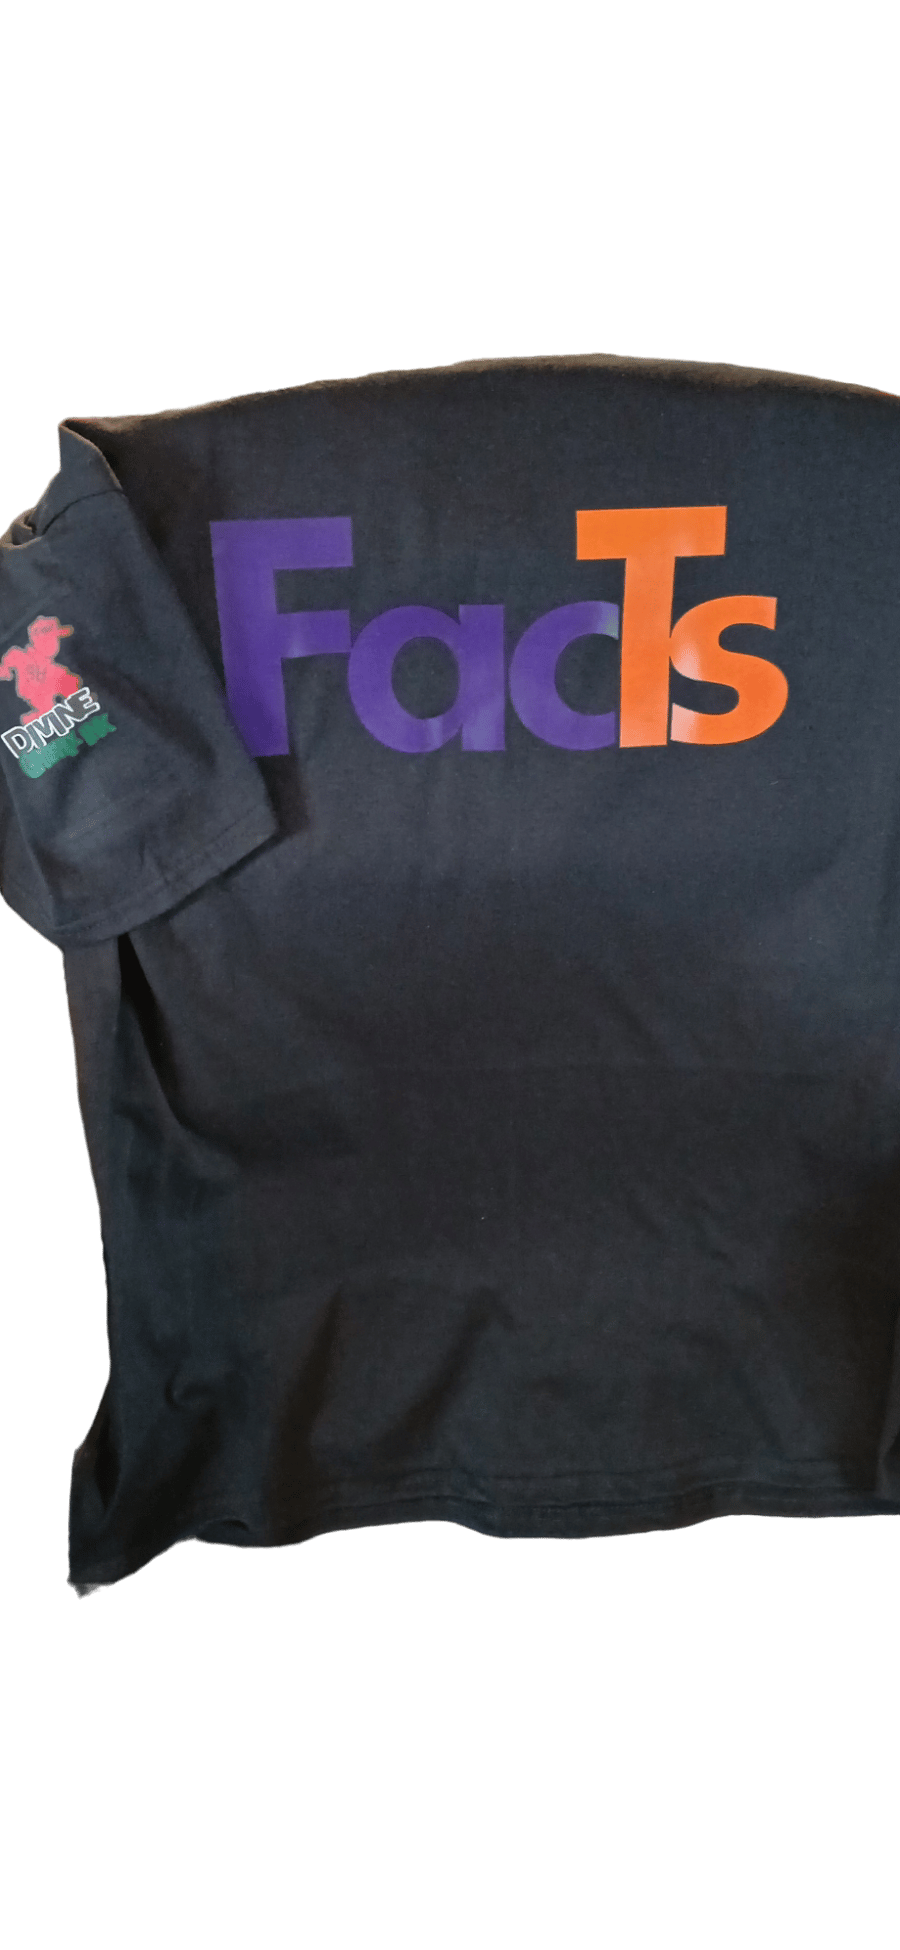 Image of "Facts" T Shirt 